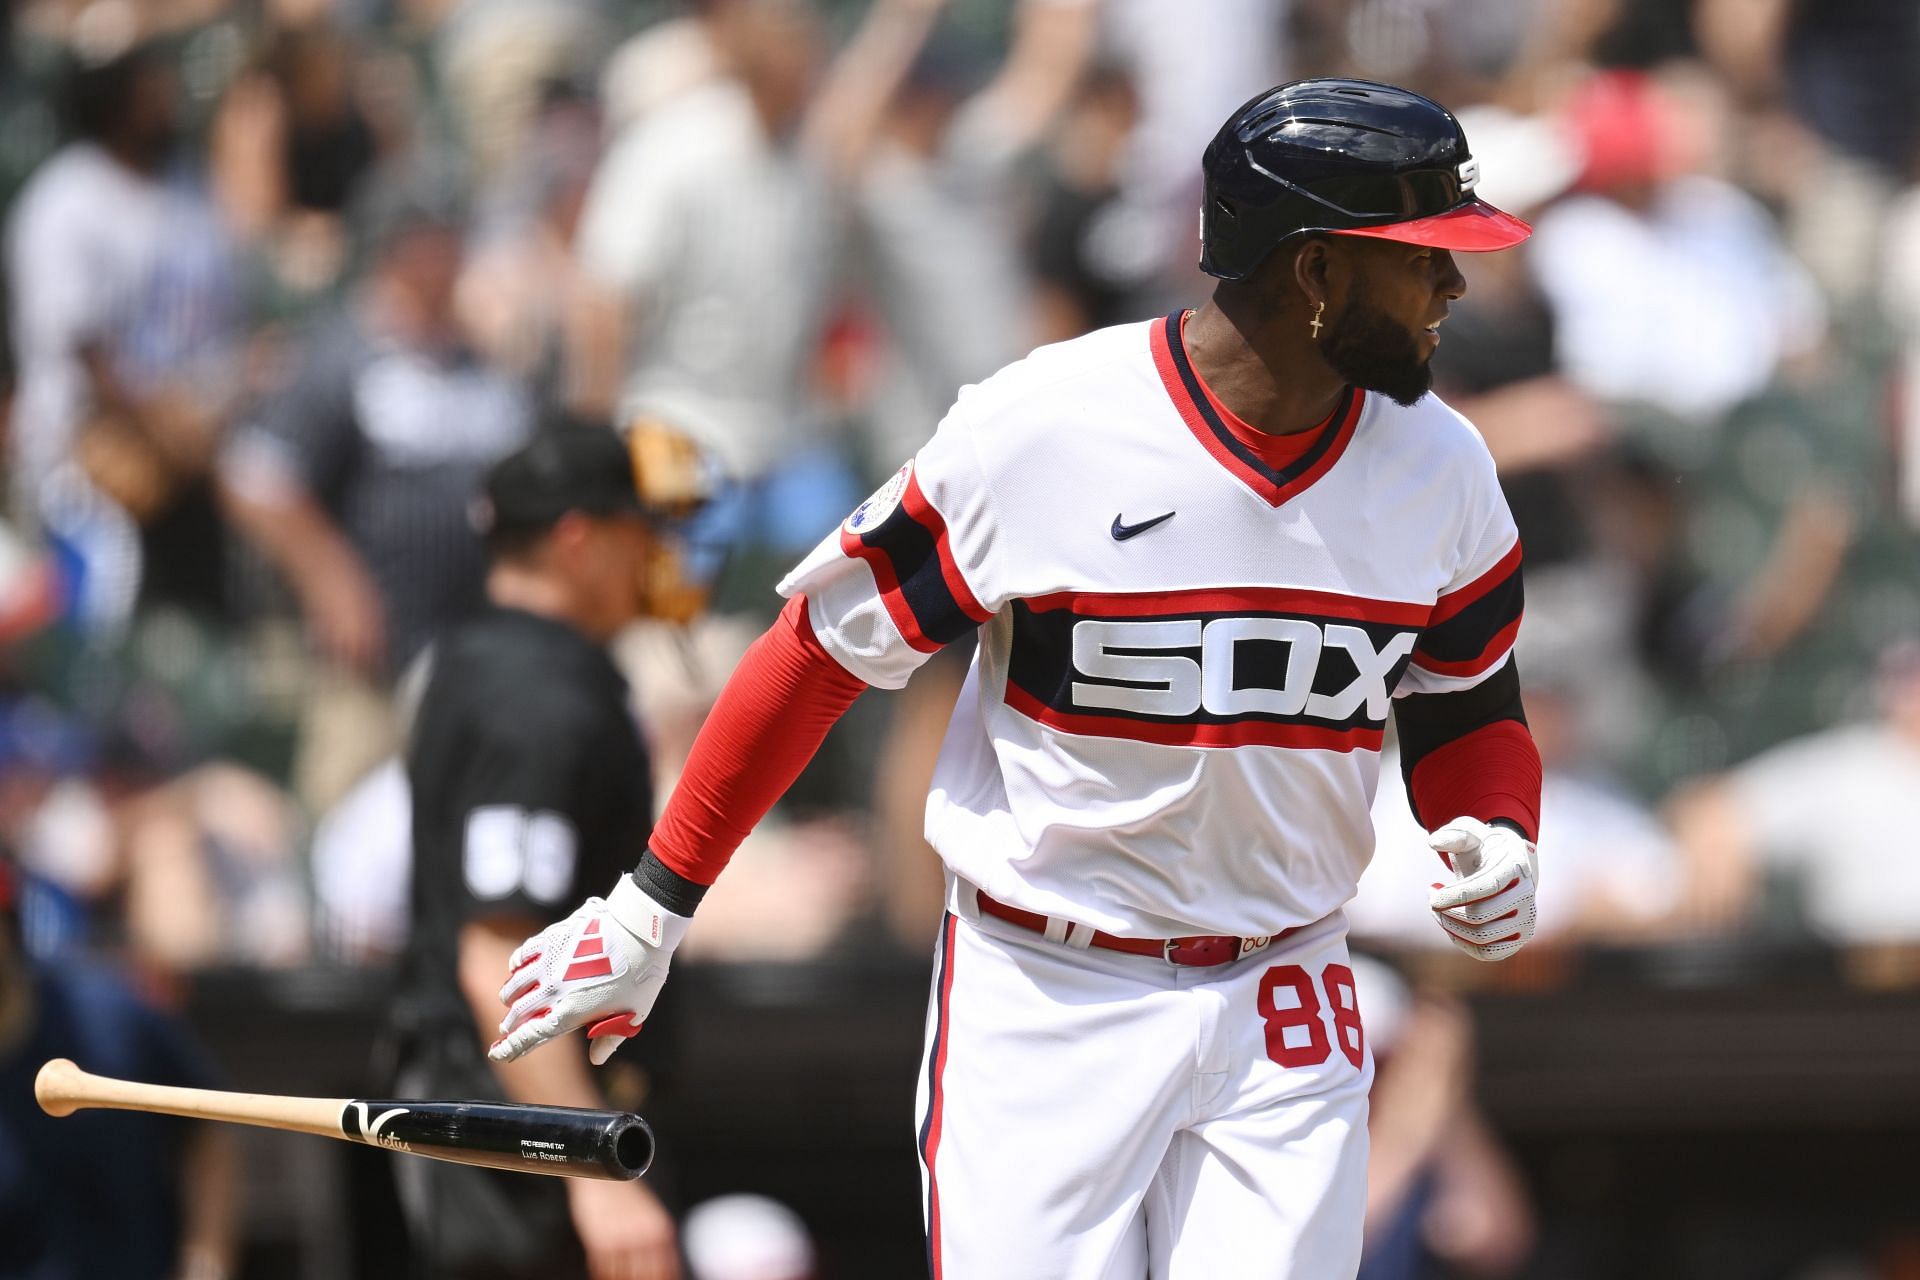 Jake Burger and Luis Robert Jr. Home Runs, by Chicago White Sox